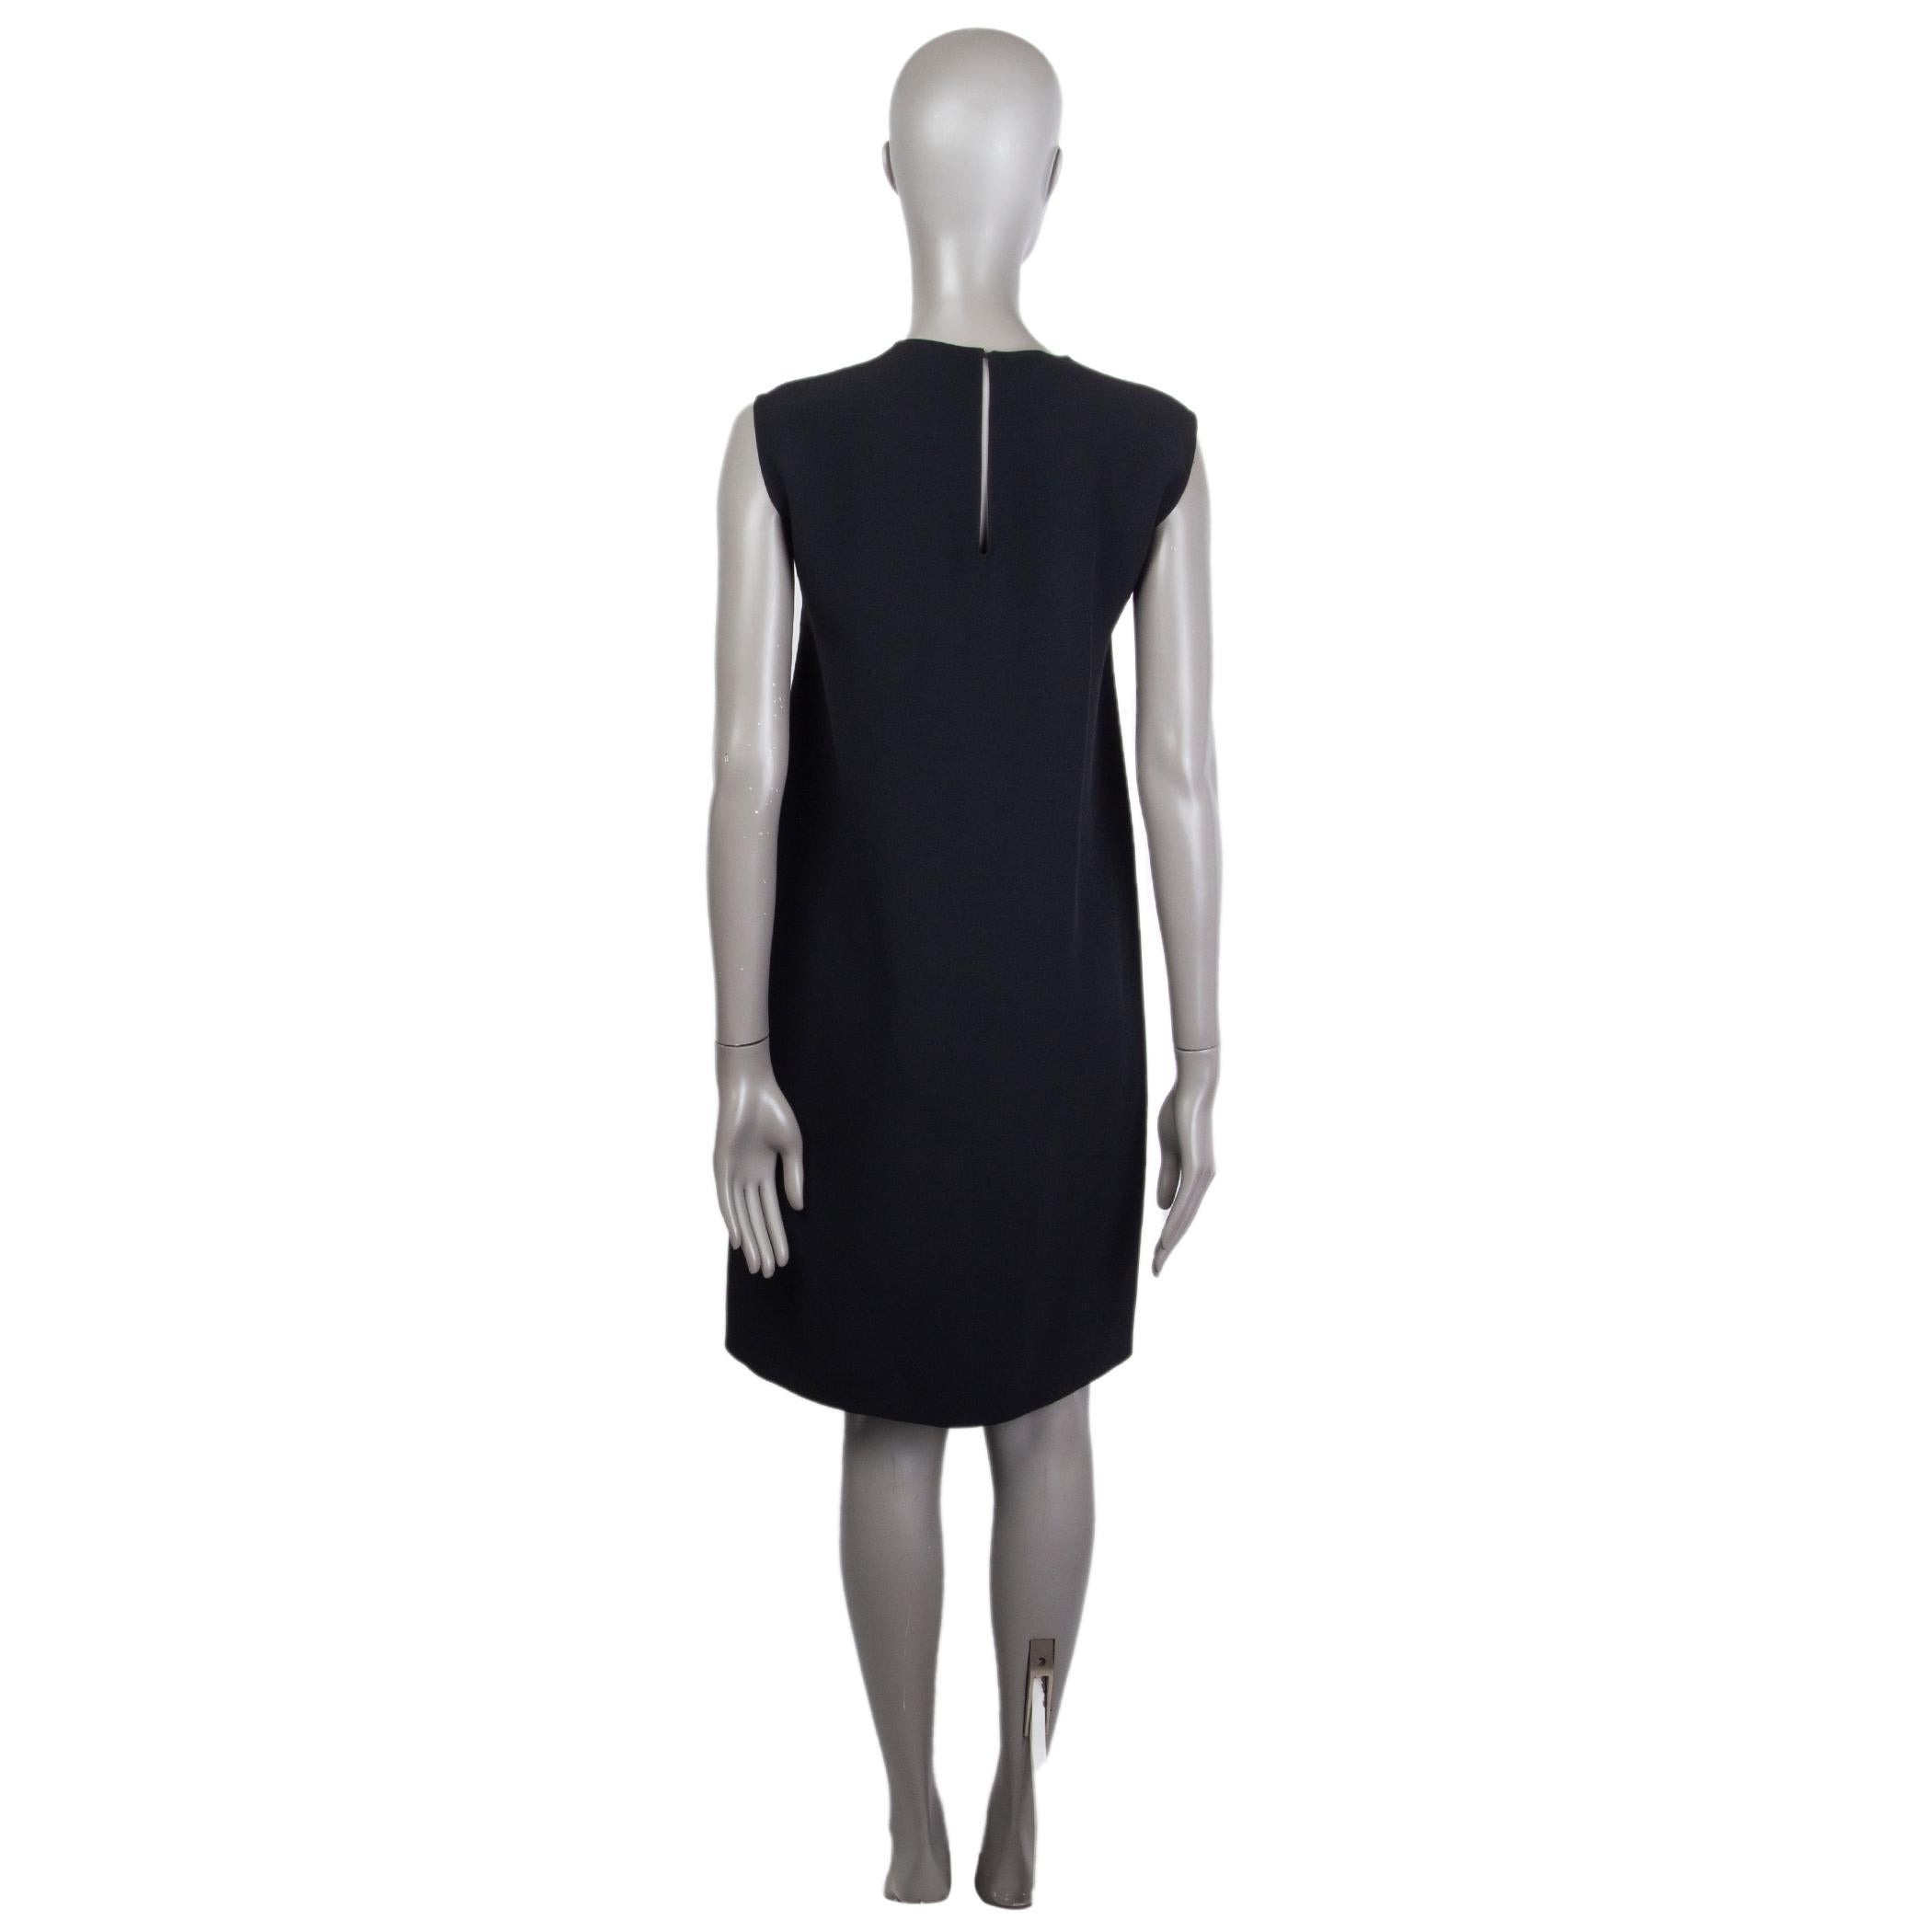 MIU MIU black viscose SLEEVELESS SHIFT Dress 40 S In Excellent Condition For Sale In Zürich, CH